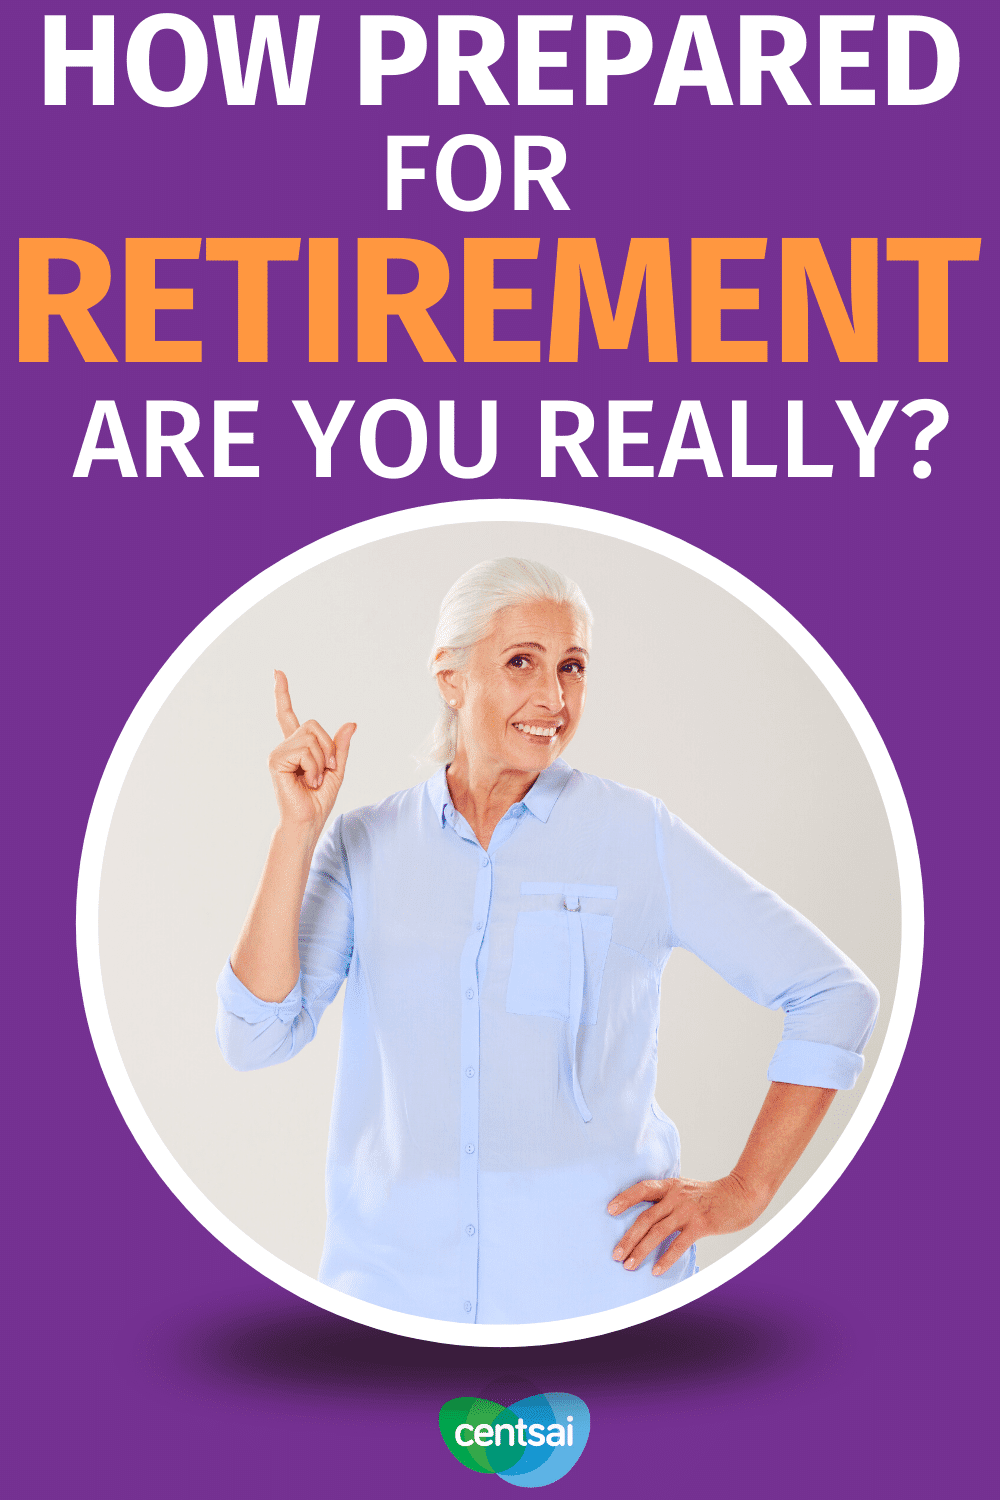 How Prepared for Retirement